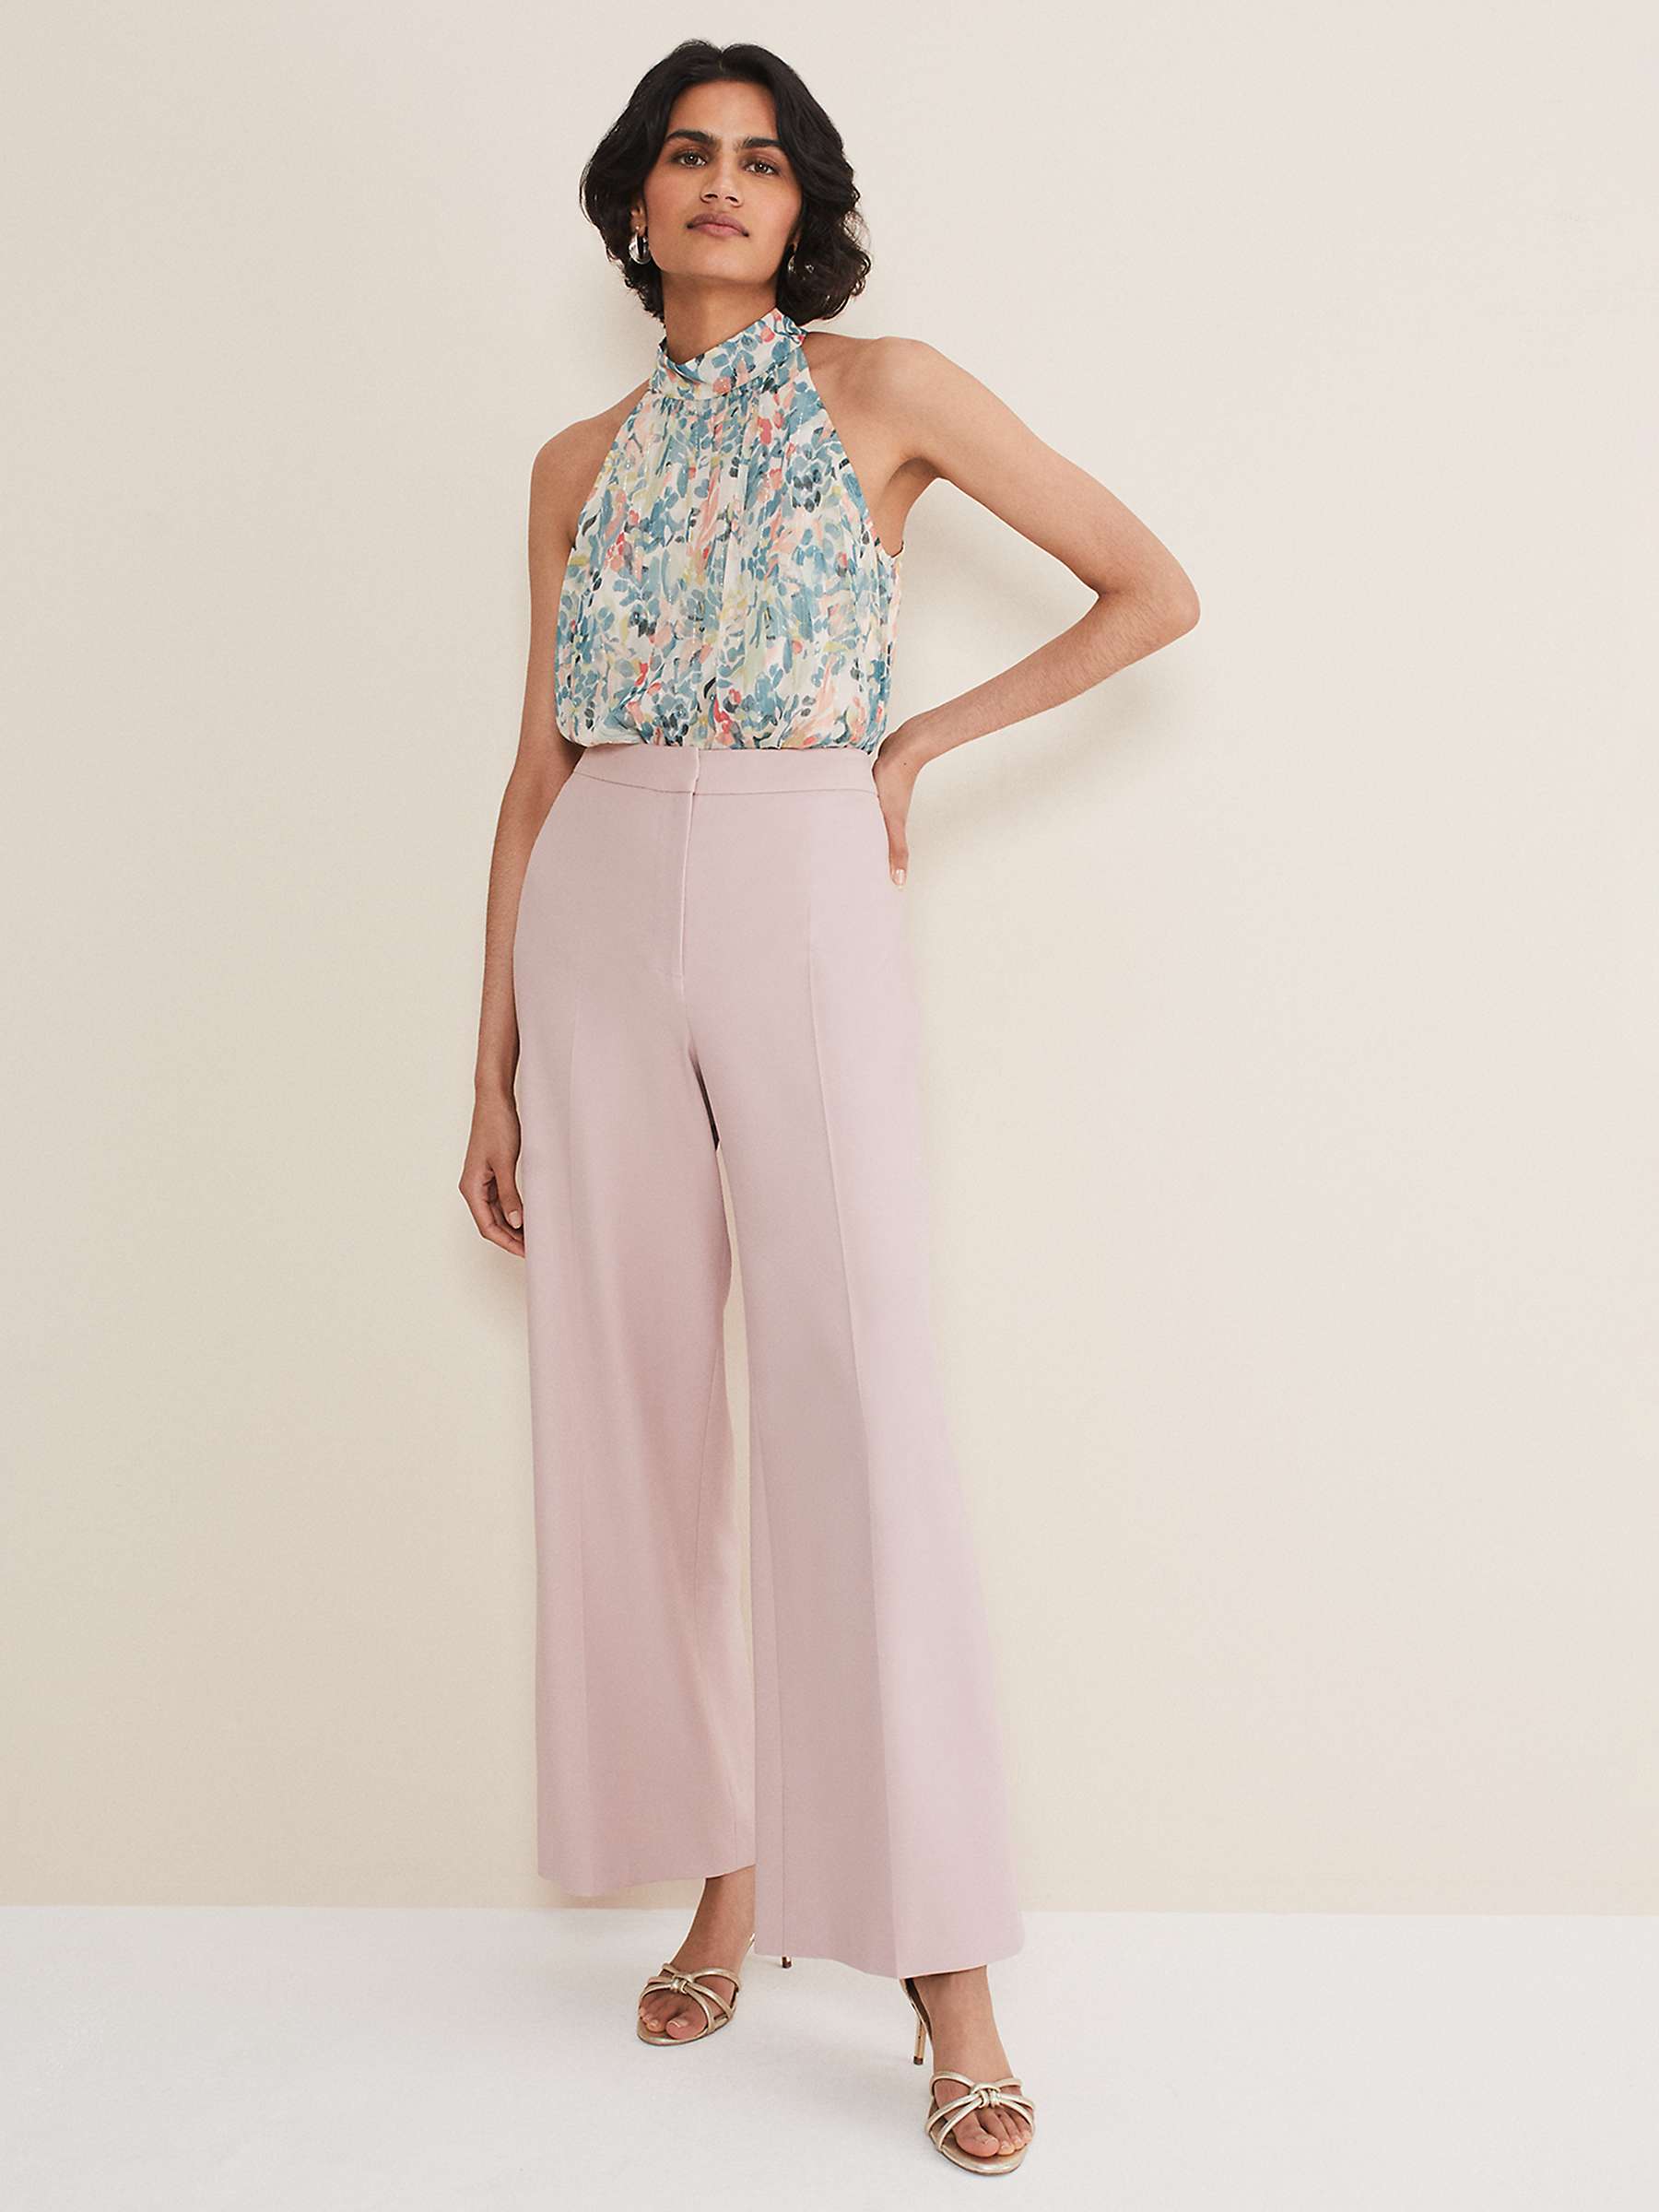 Phase Eight Celyn Wide Leg Trousers, Antique Rose at John Lewis & Partners